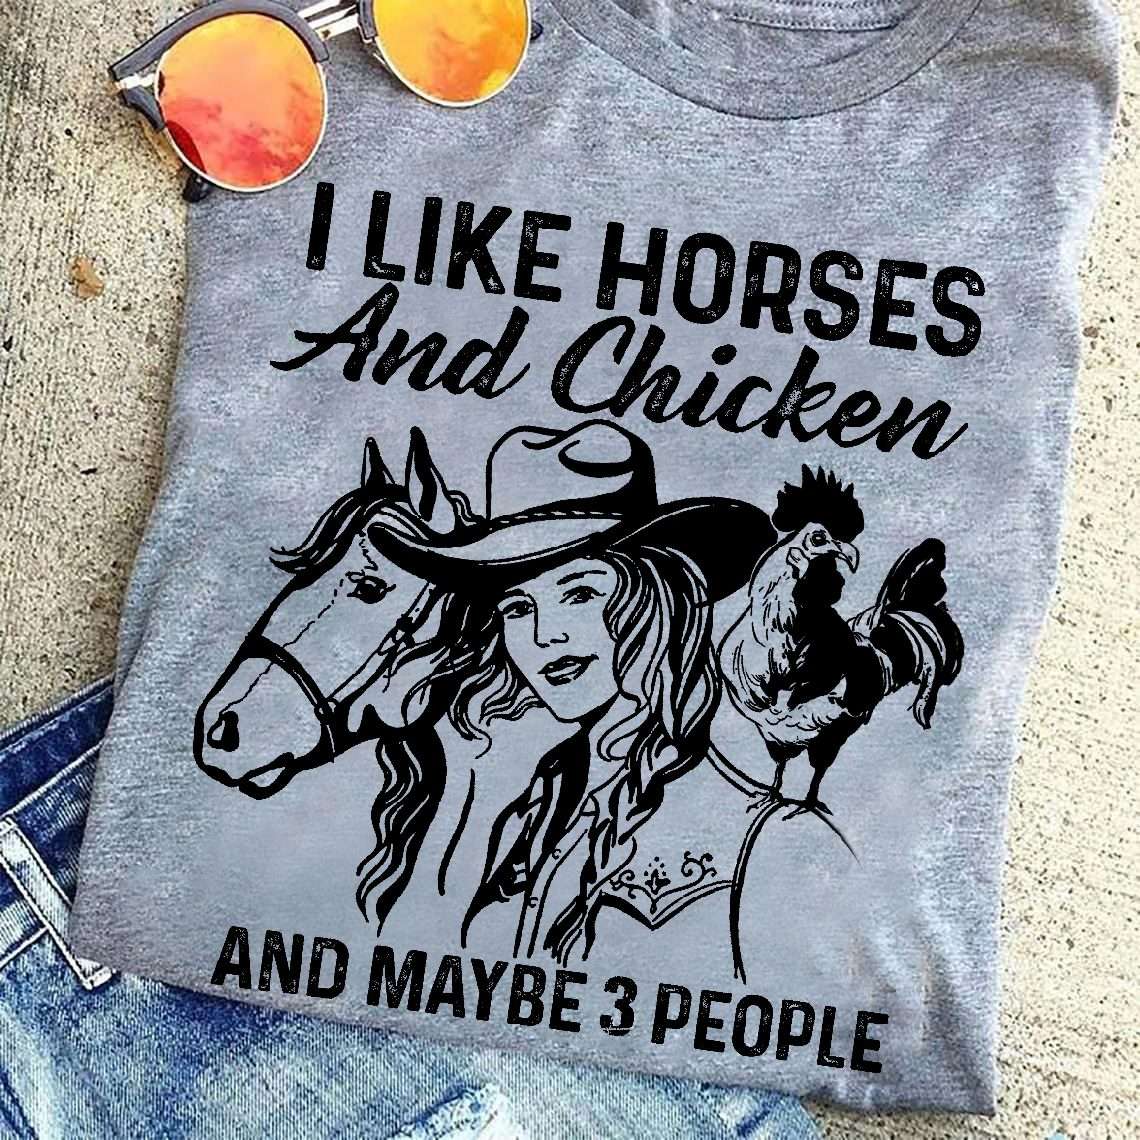 I like horses and chicken and maybe 3 people - Woman horse and chicken, horses and chickens